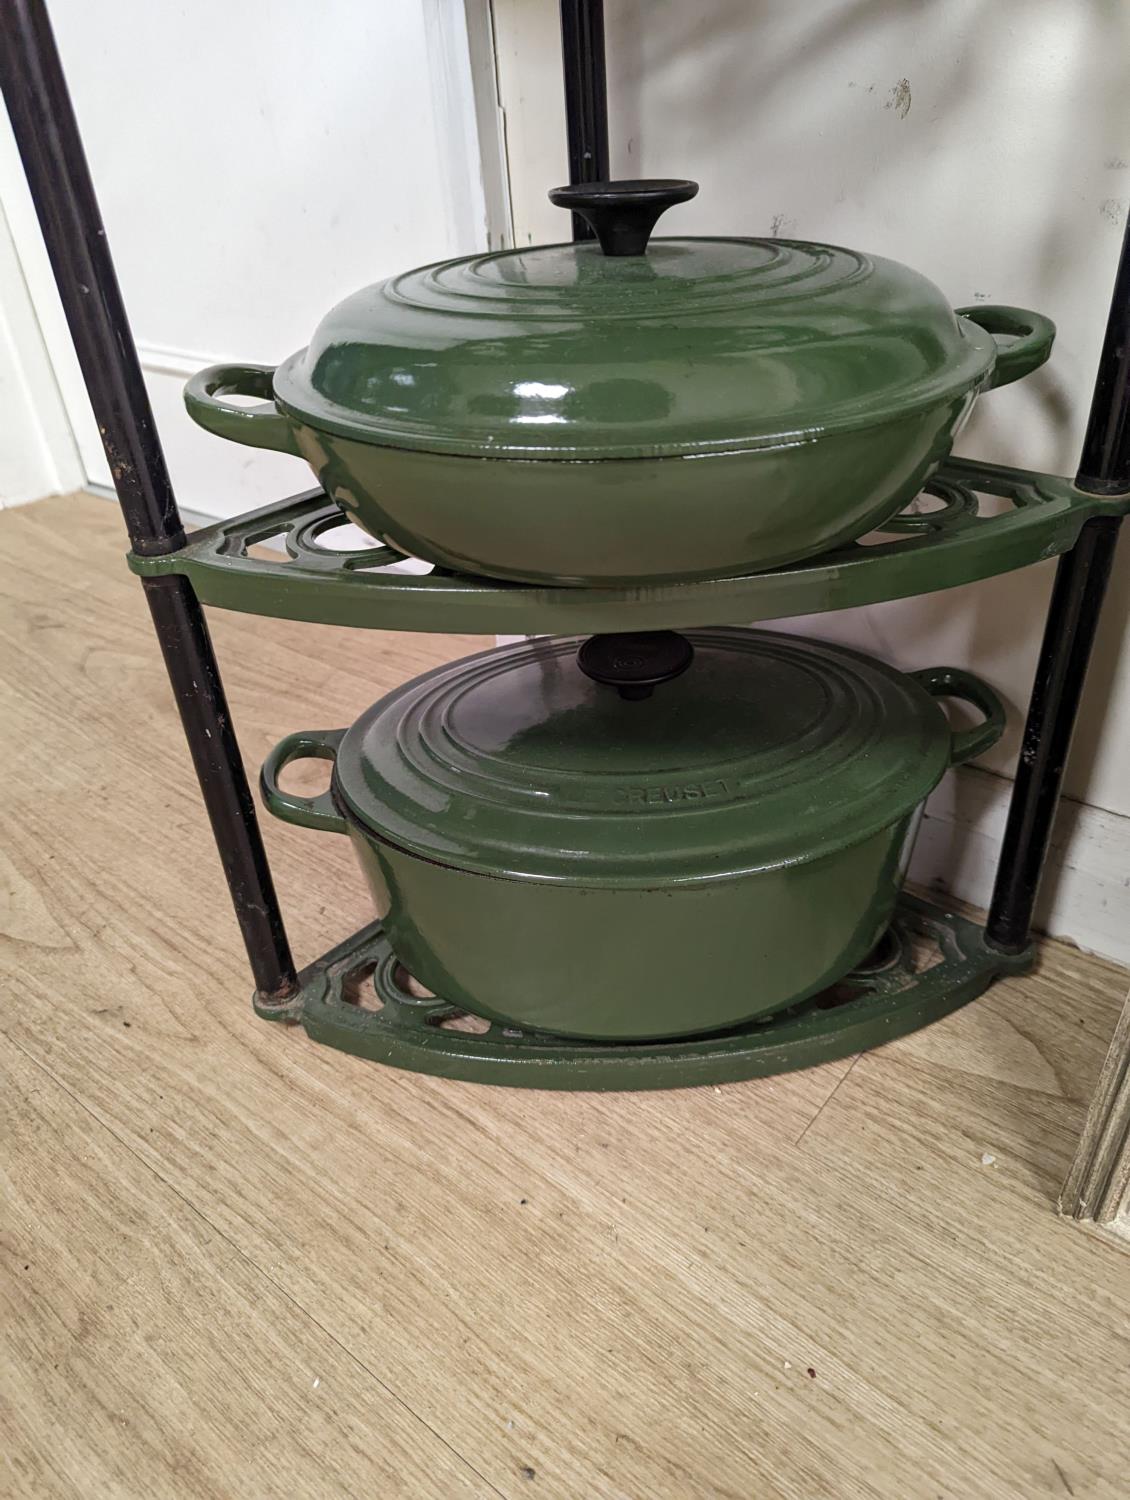 A green enamel Le Cruset pot stand, three pans and a bottle rack,stand 90 cms high. - Image 5 of 5